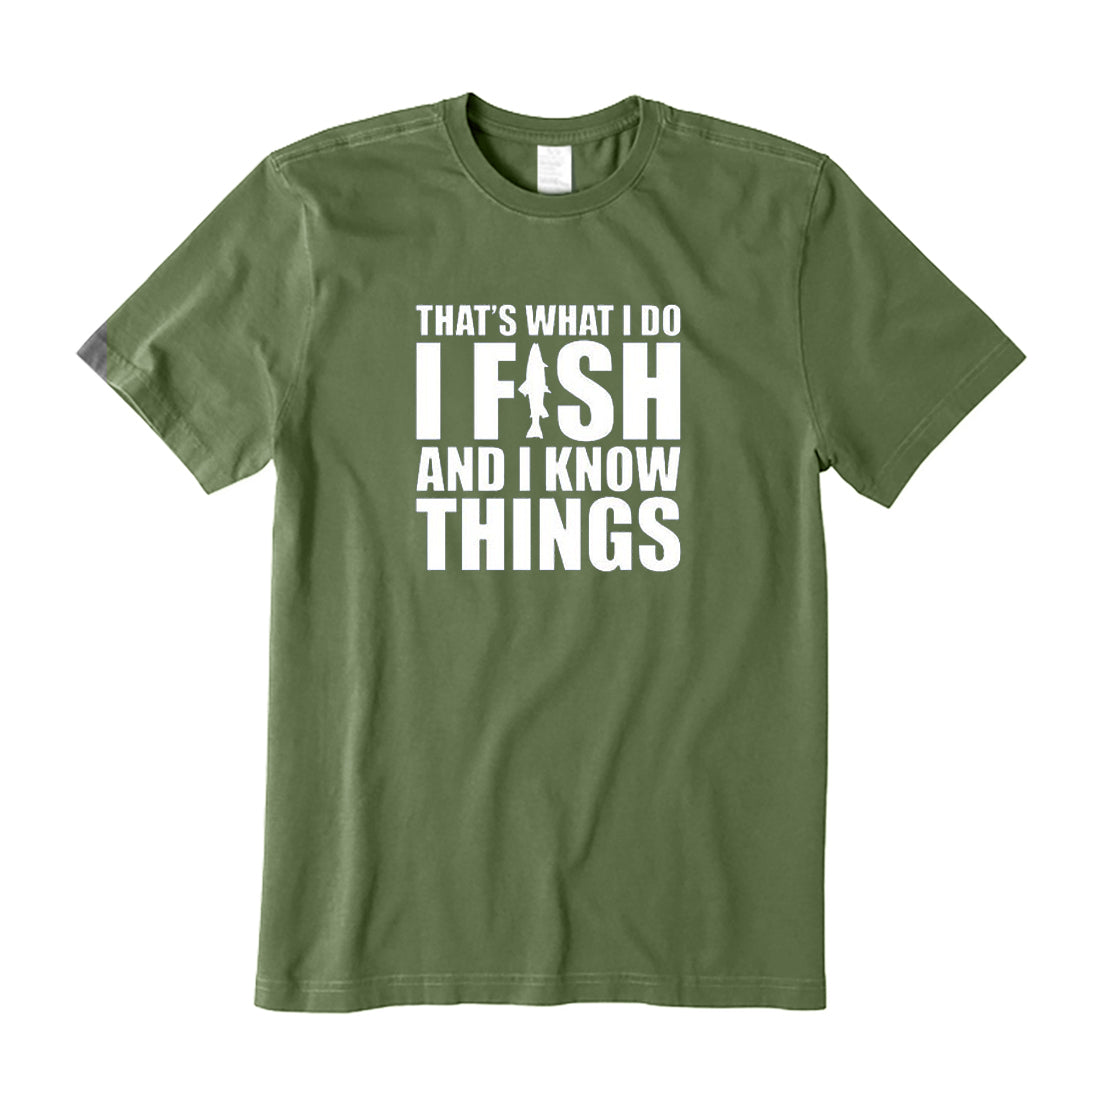 I Fish and I know Things T-Shirt